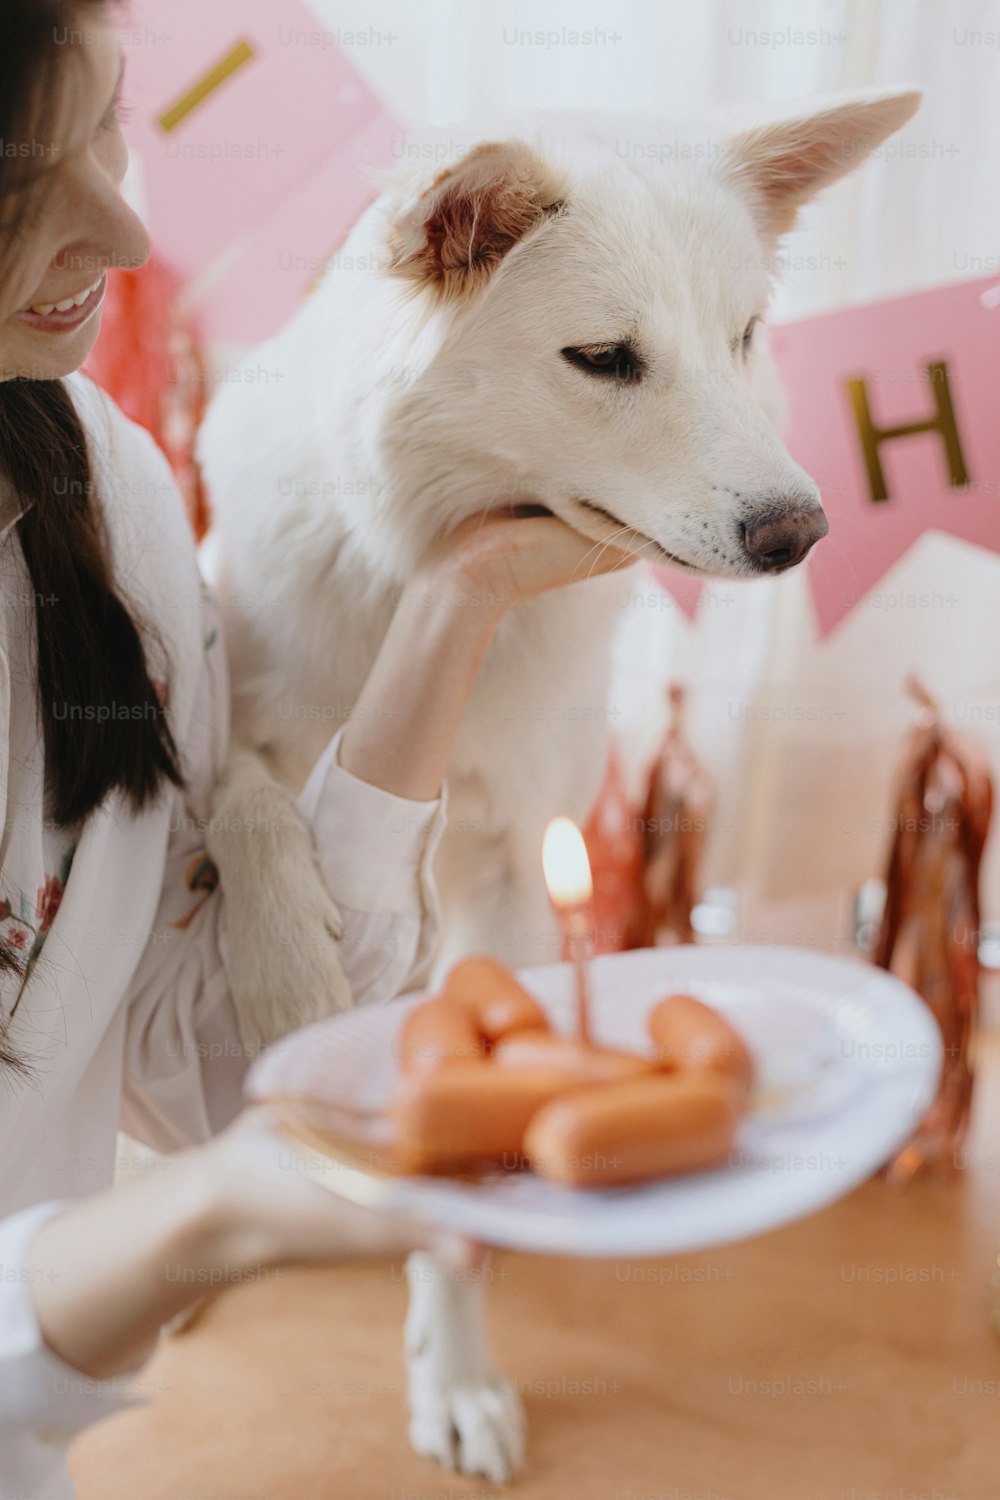 Happy young woman celebrating dog birthday with sausage cake and candle on background of pink garland and decorations. Dog birthday party. Adorable white swiss shepherd dog first birthday